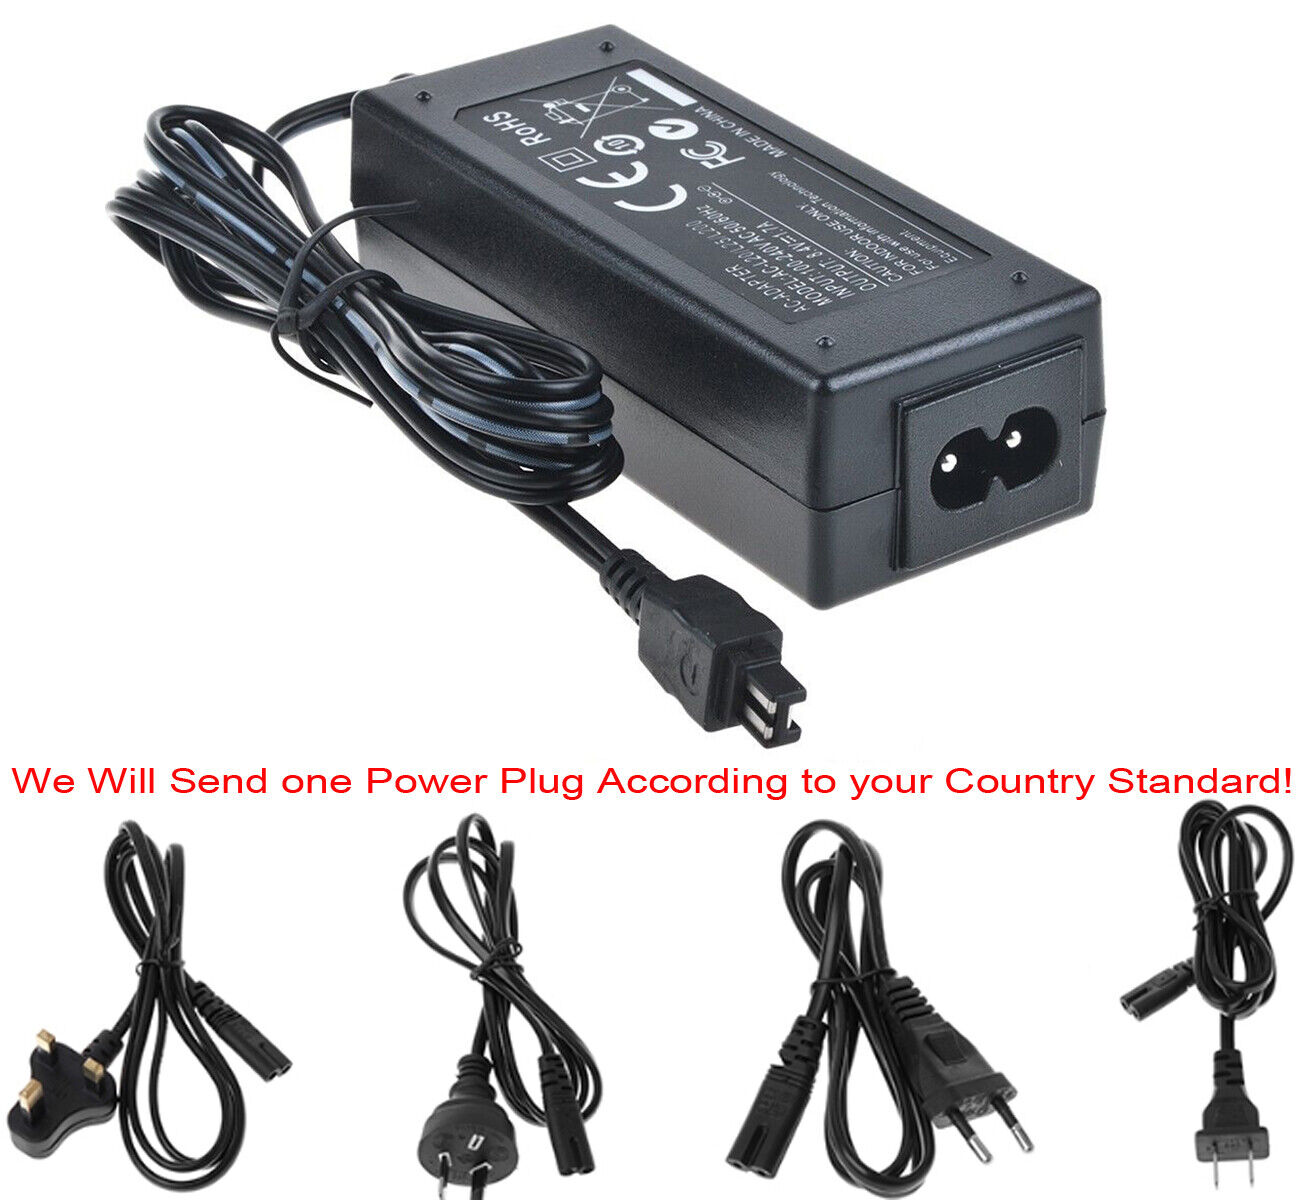 AC Adapter Power Supply for Sony HXR-MC50, PXW-X70, PXW-Z90, PXW-Z90V Camcorder Country/Region of Manufacture China Com